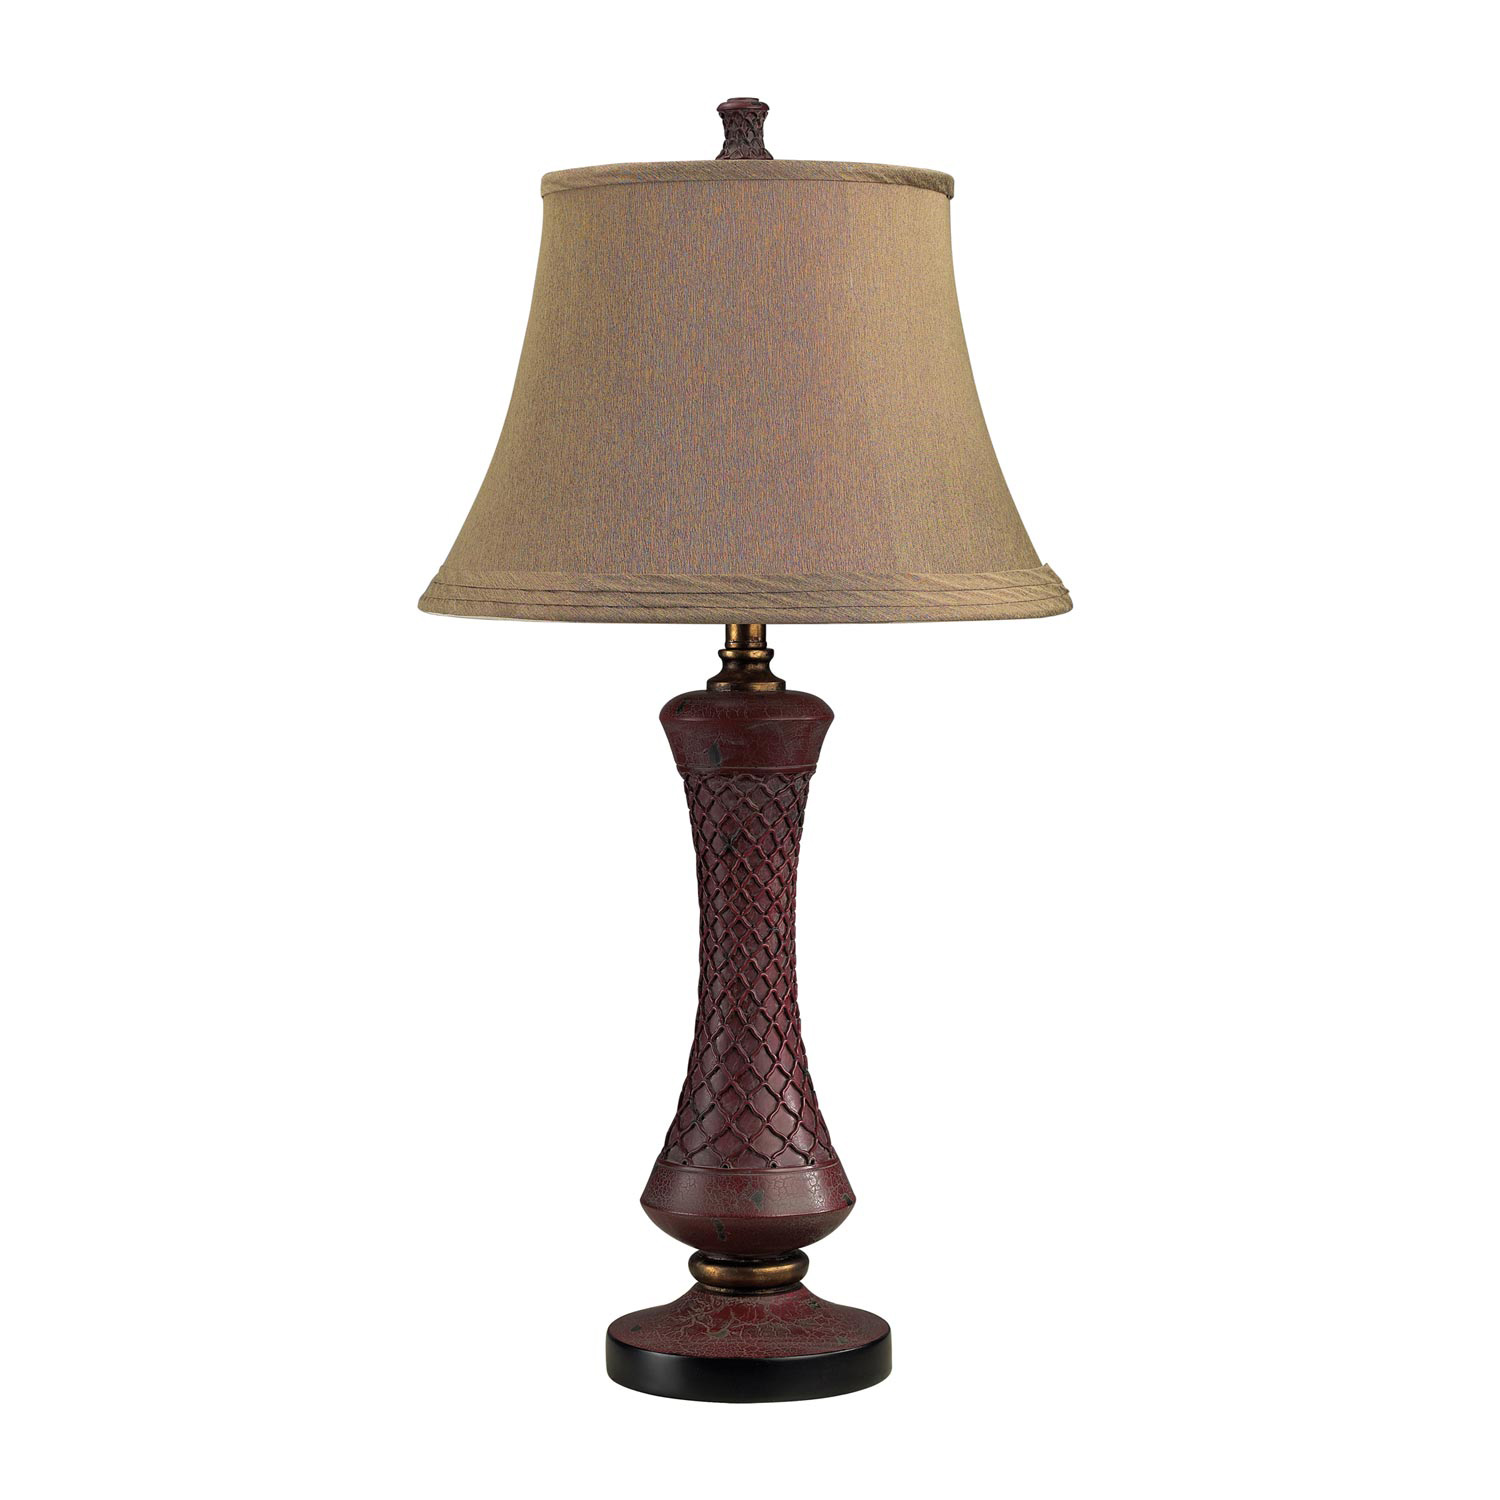 Elk Lighting 113-1118 Columbia Place Table Lamp - Toledo Distressed Red